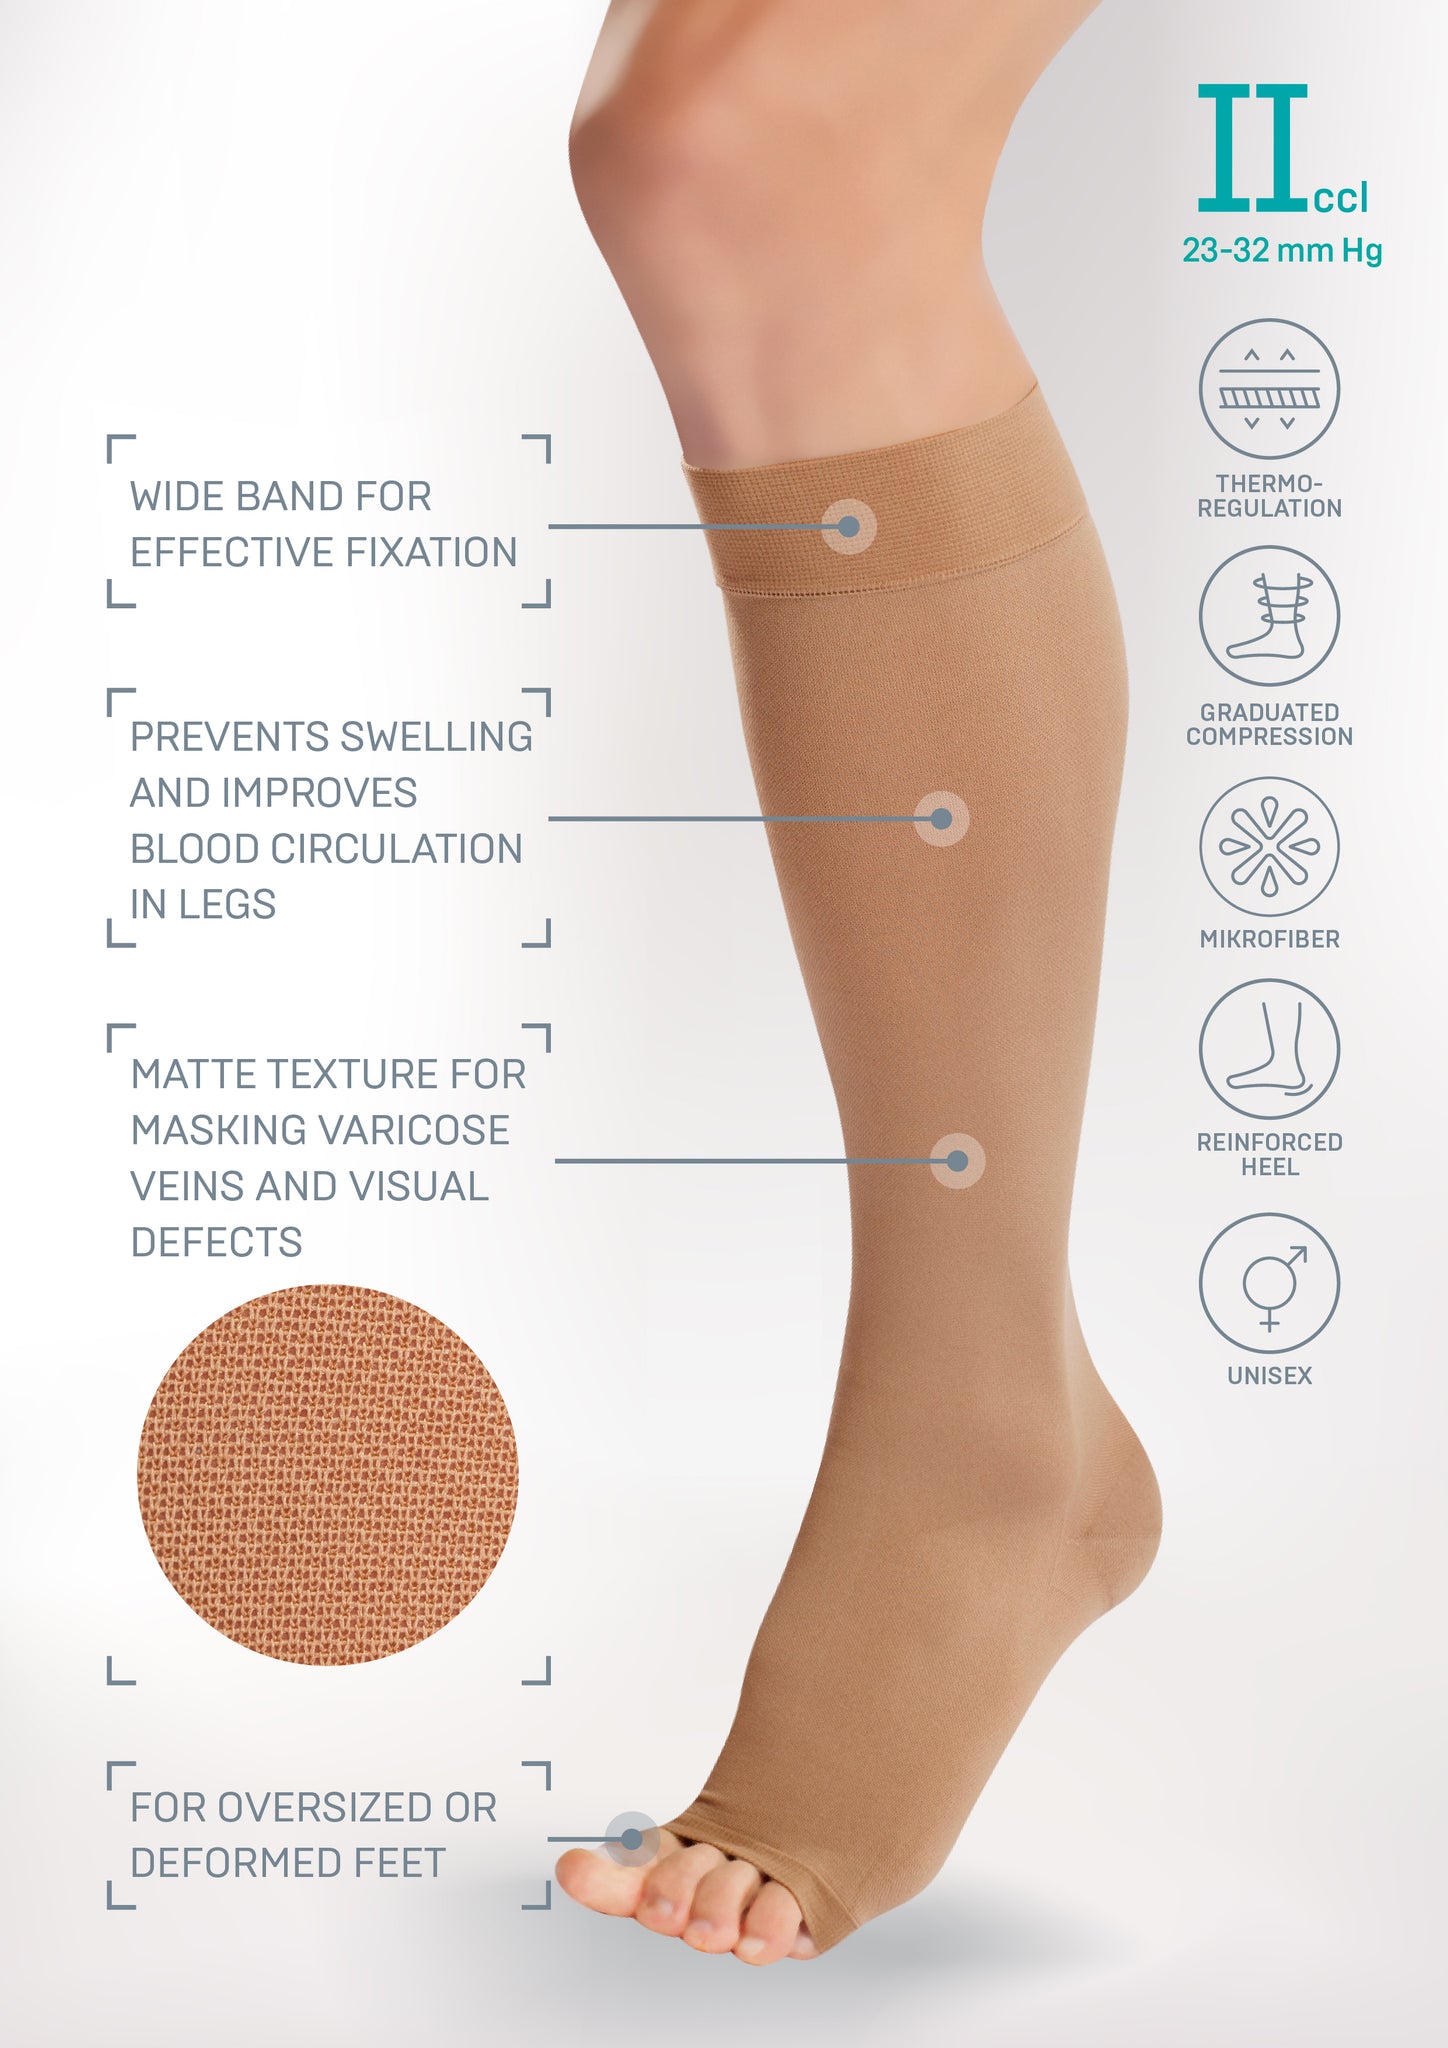 Medical compression thigh stockings, patterned - Tonus Elast